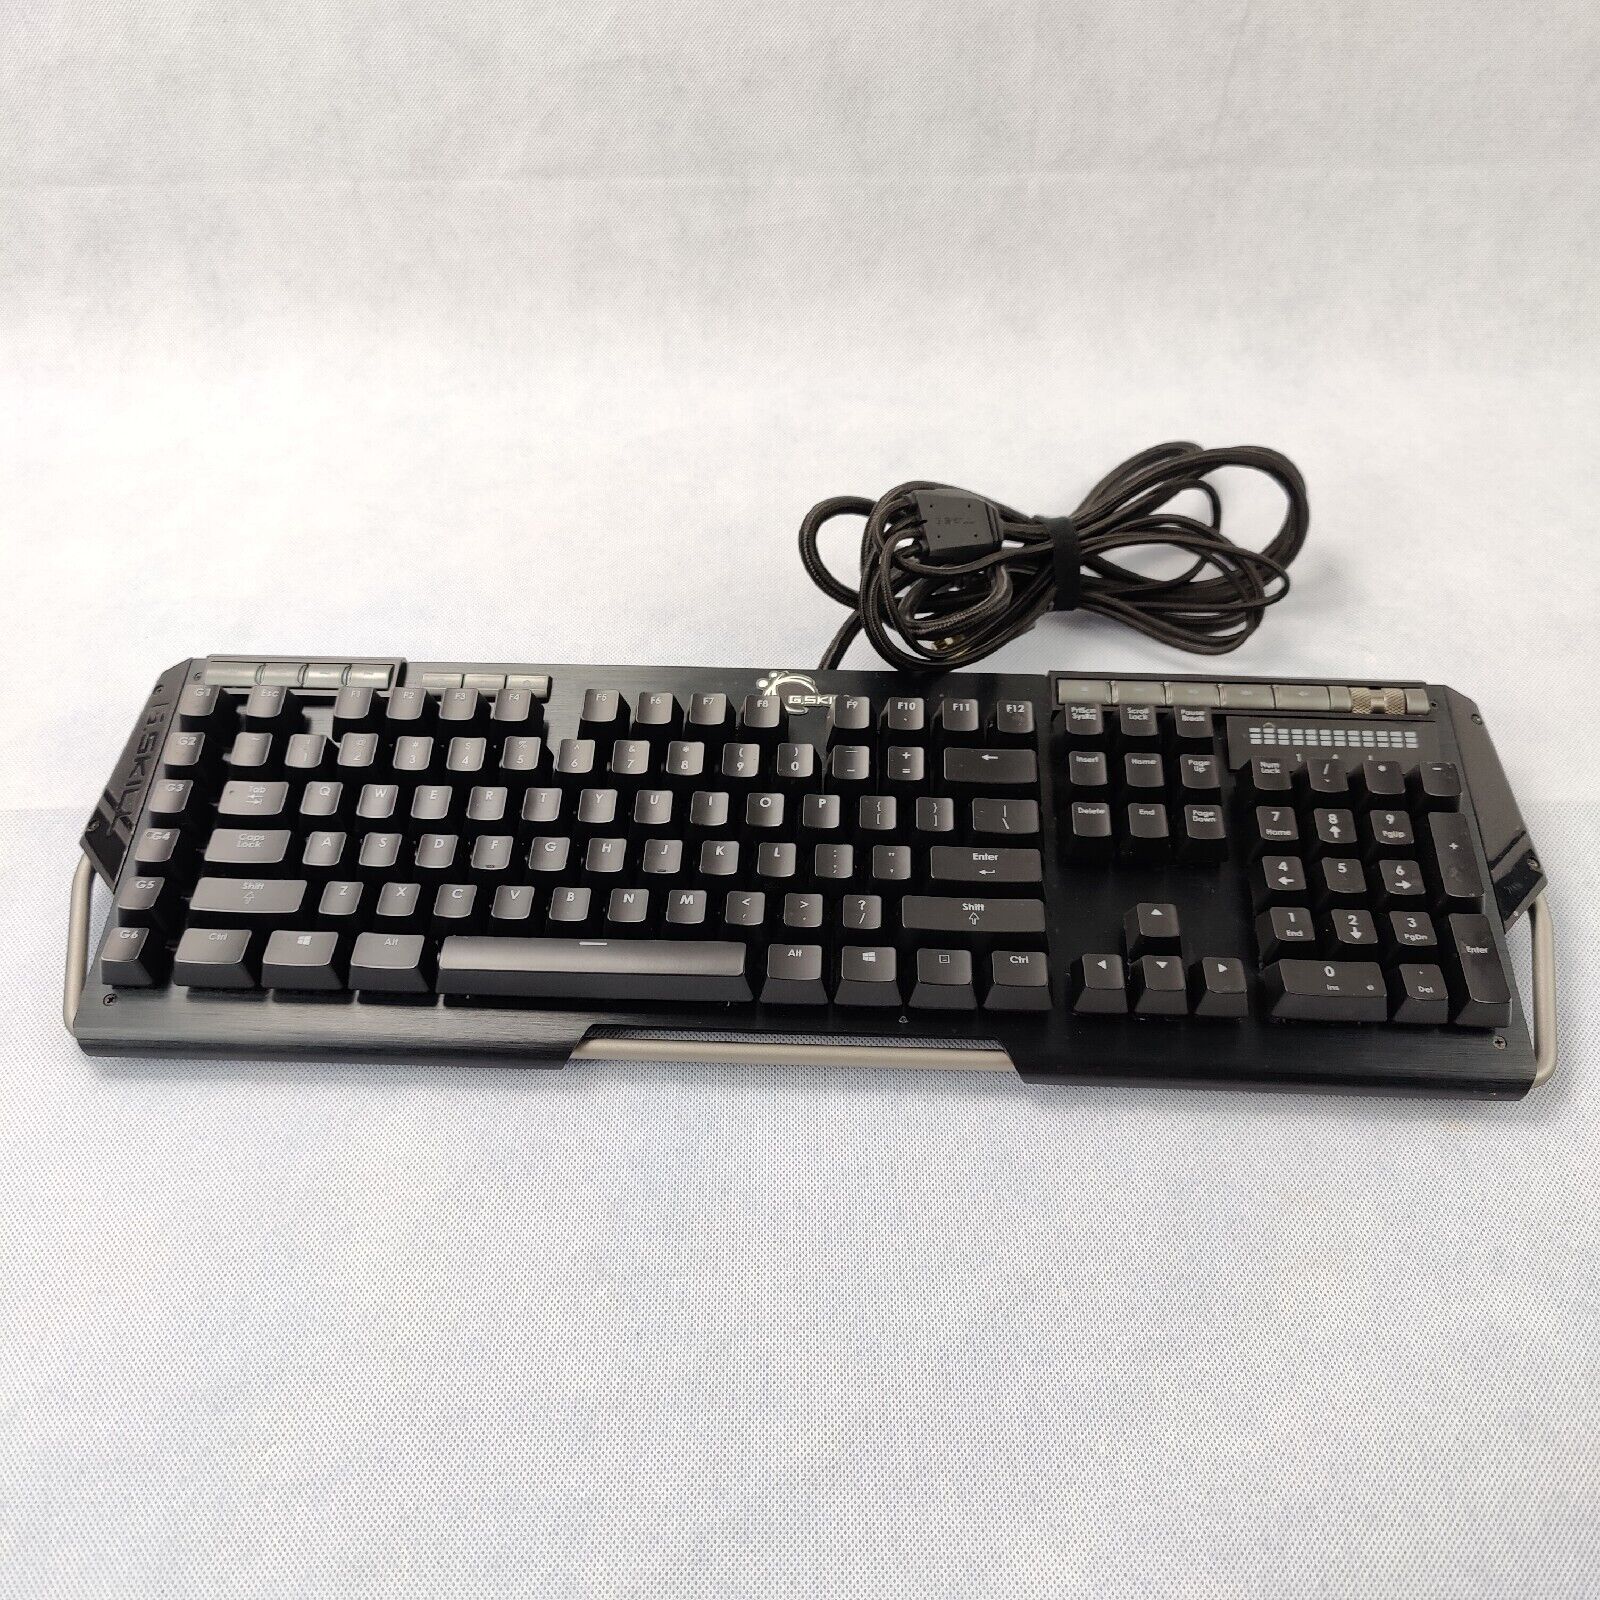 PRE-OWNED Mechanical Gaming Keyboard, Cherry MX  RIPJAWS KM780R MX